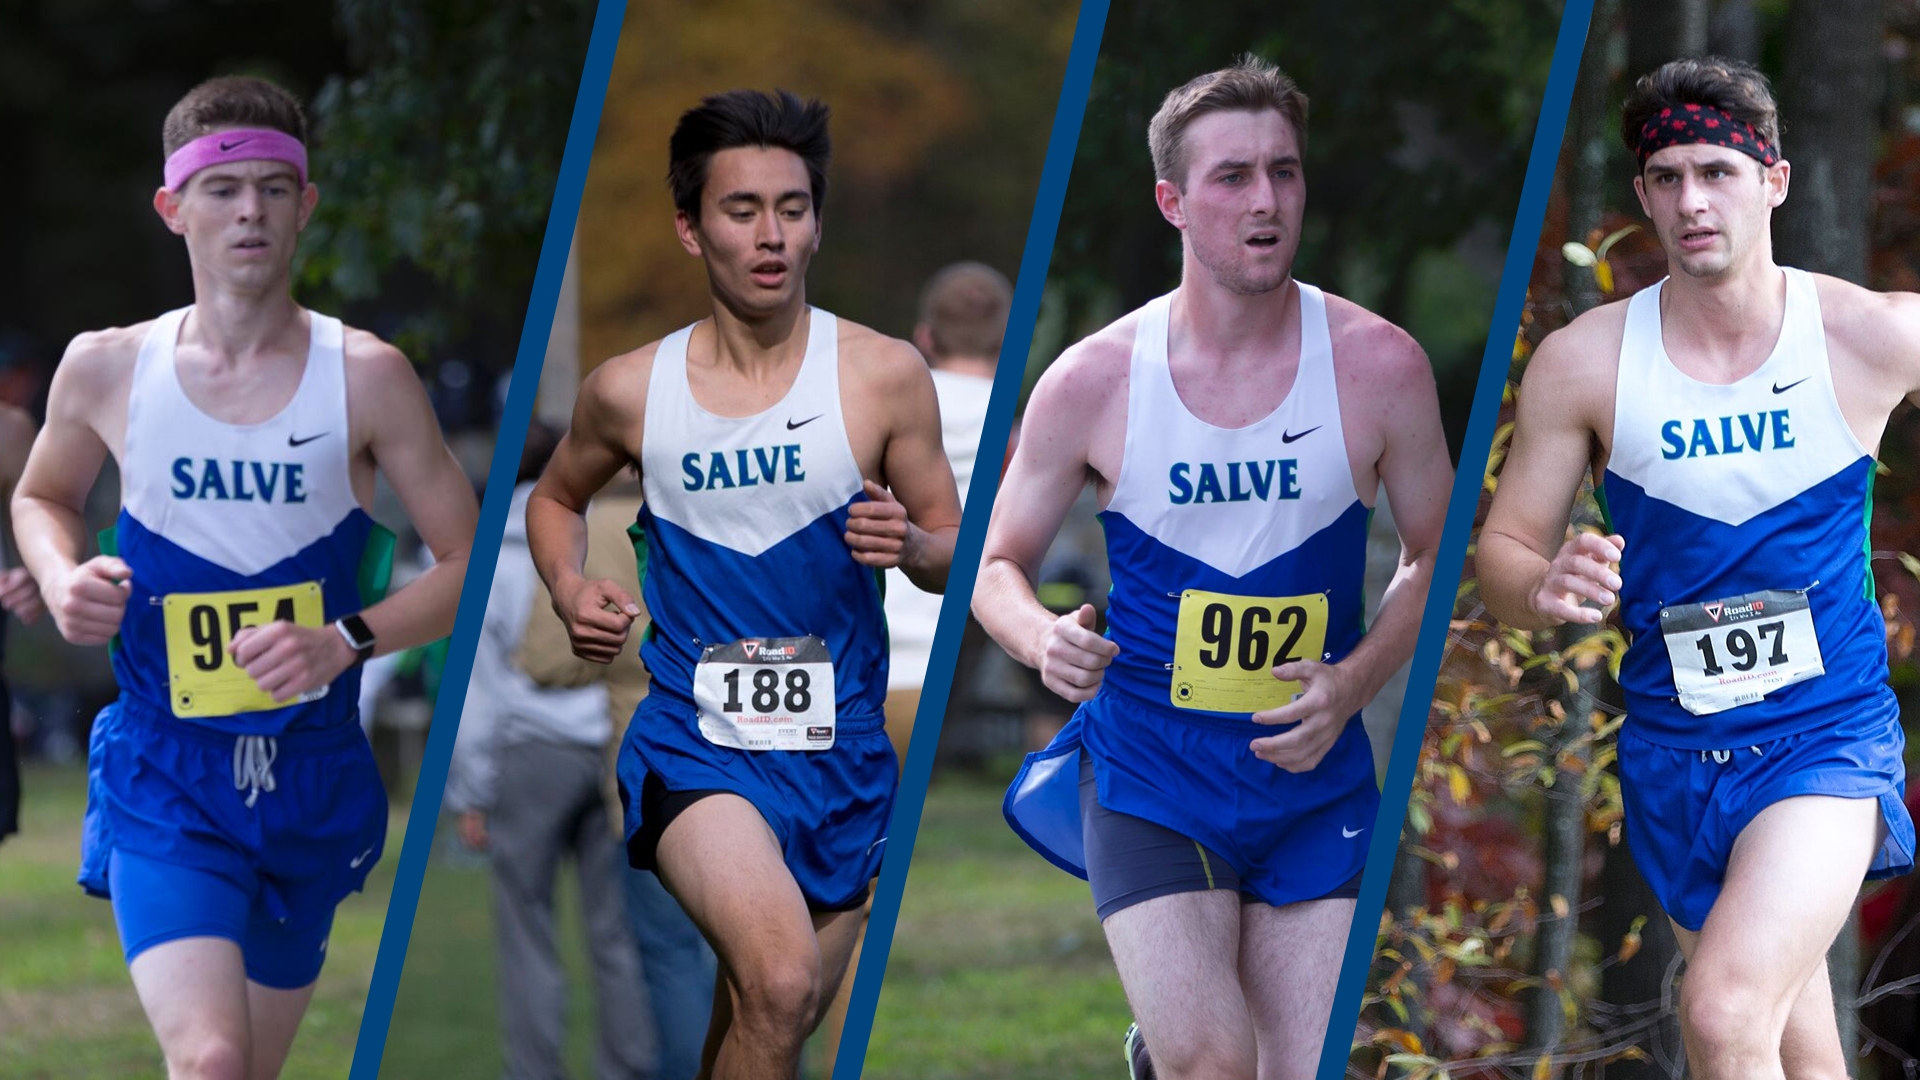 Scott Brewer, Dan Donnelly, David Napierkowski, and Andrew Sardelli lead the Seahawk men's cross country team in 2017.